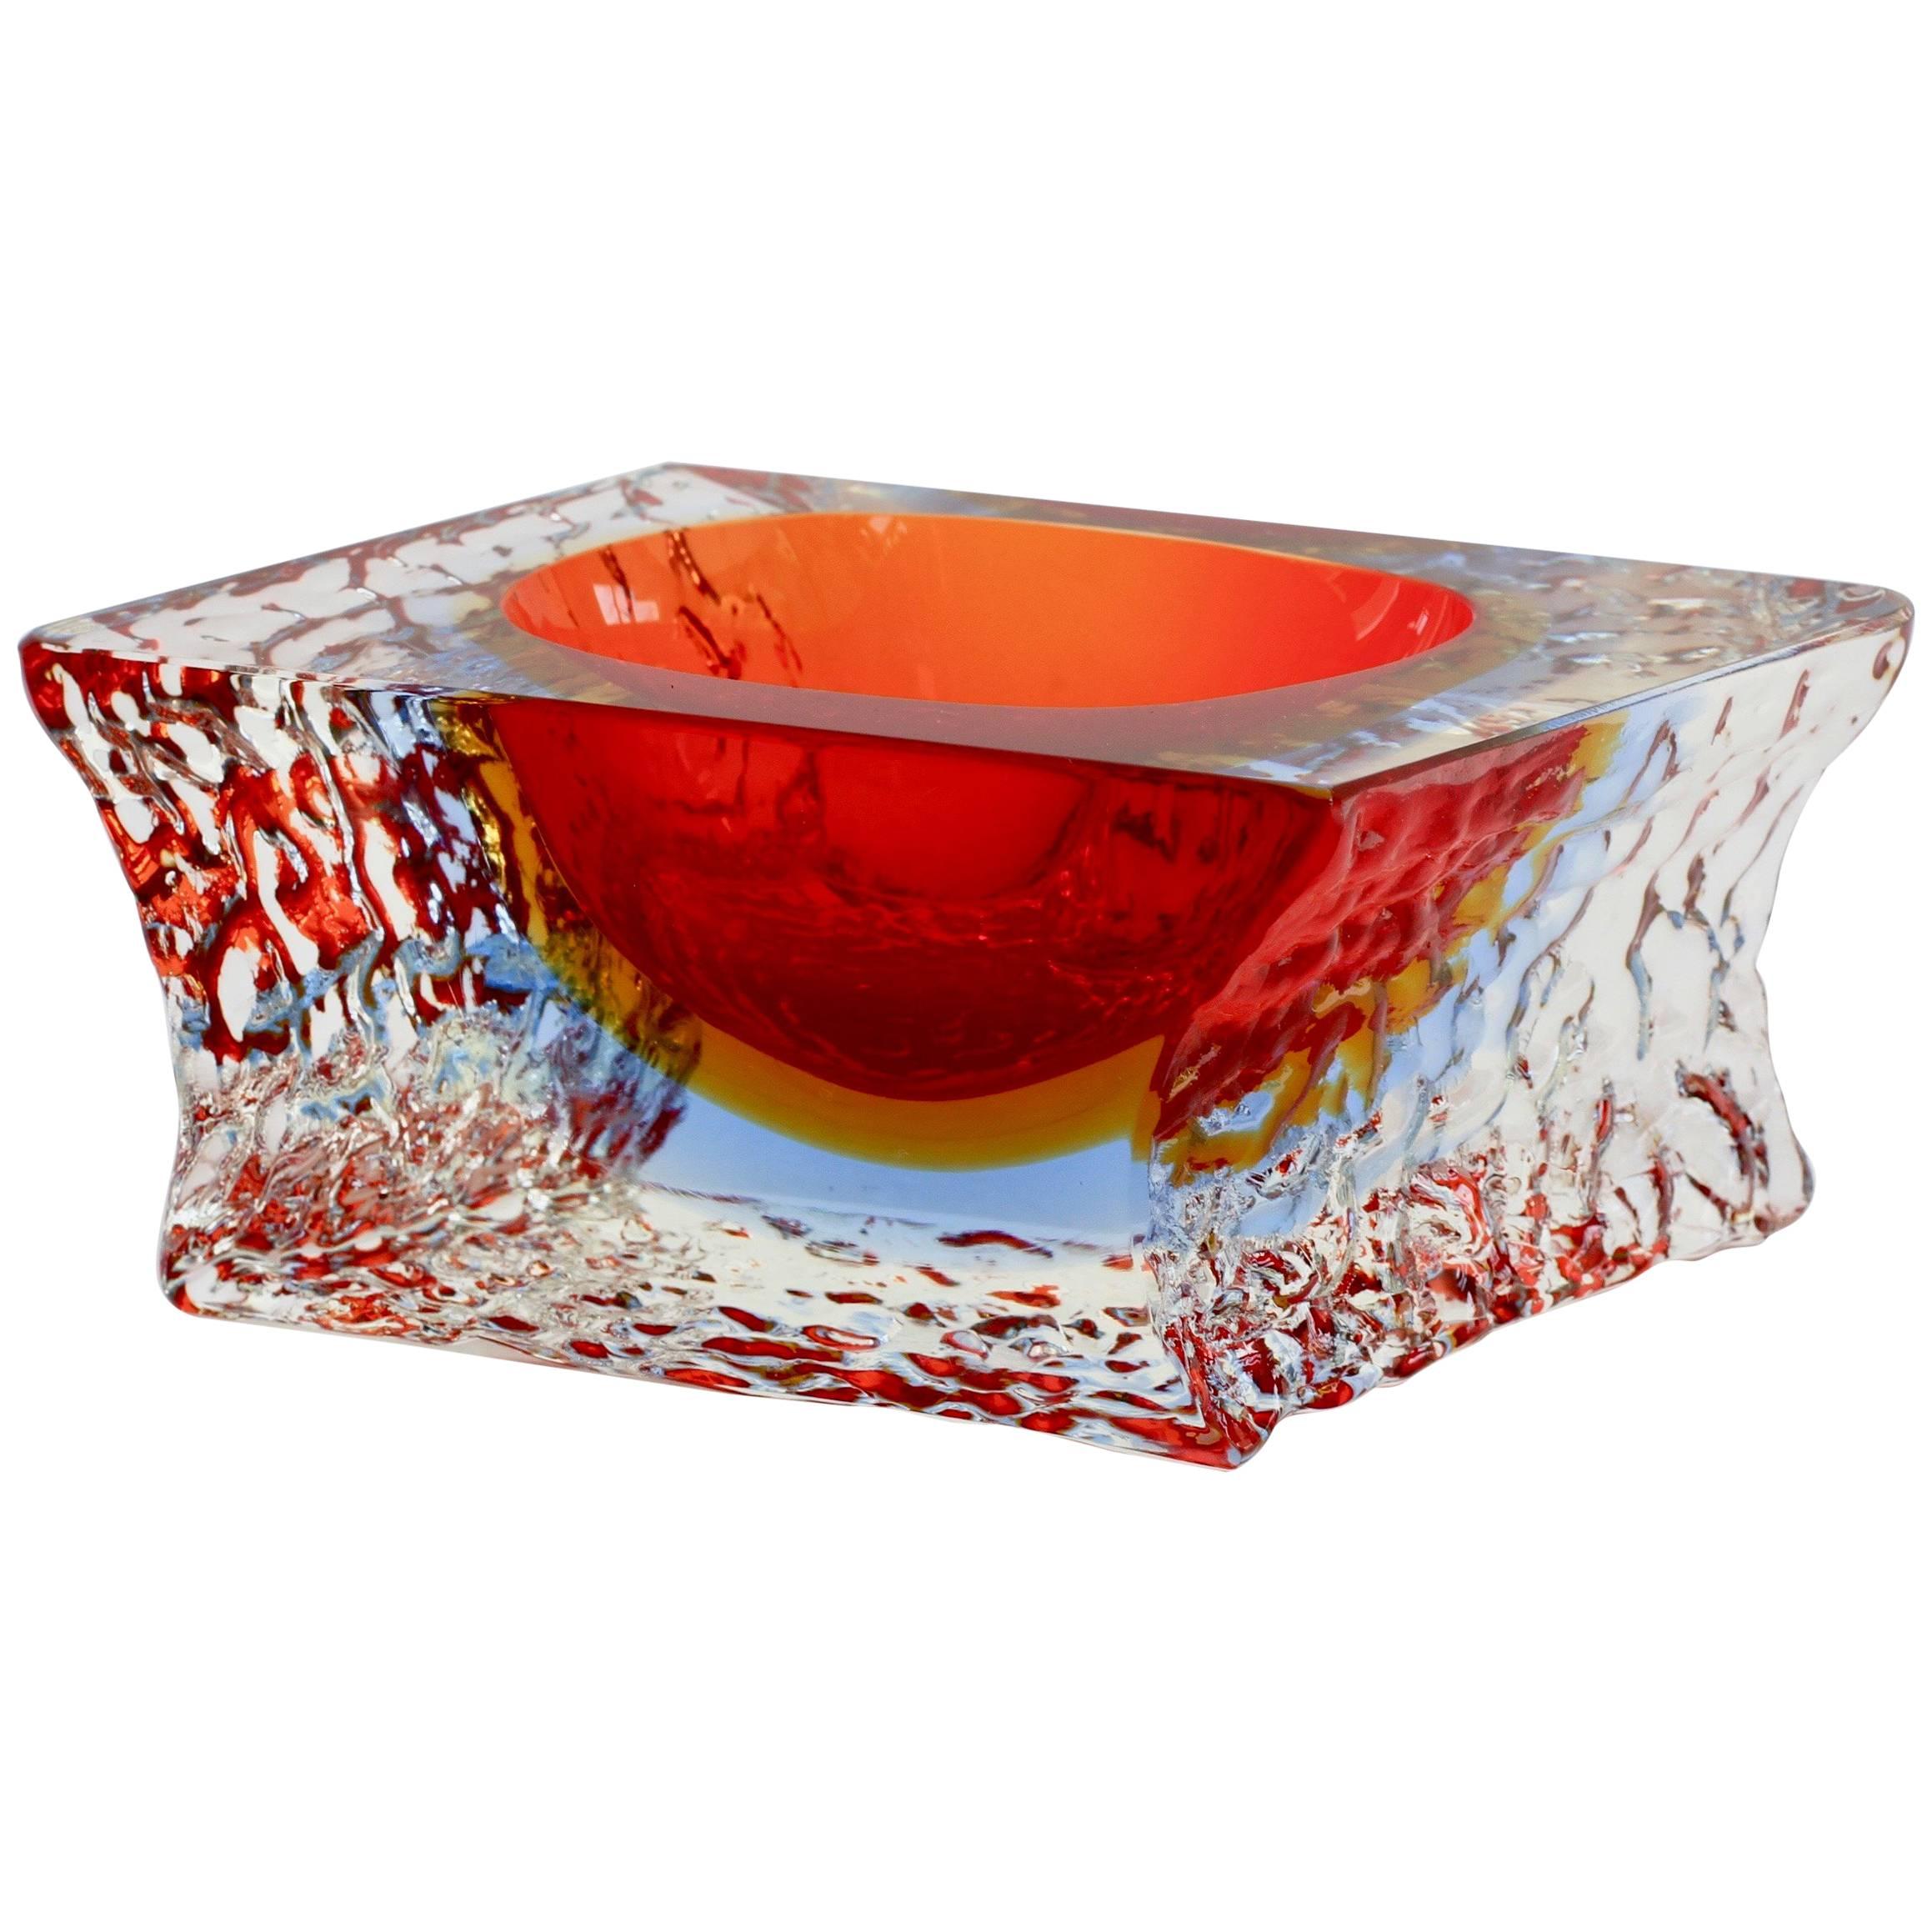 Textured and Faceted Murano Sommerso Ice Glass Bowl Attributed to Mandruzzato